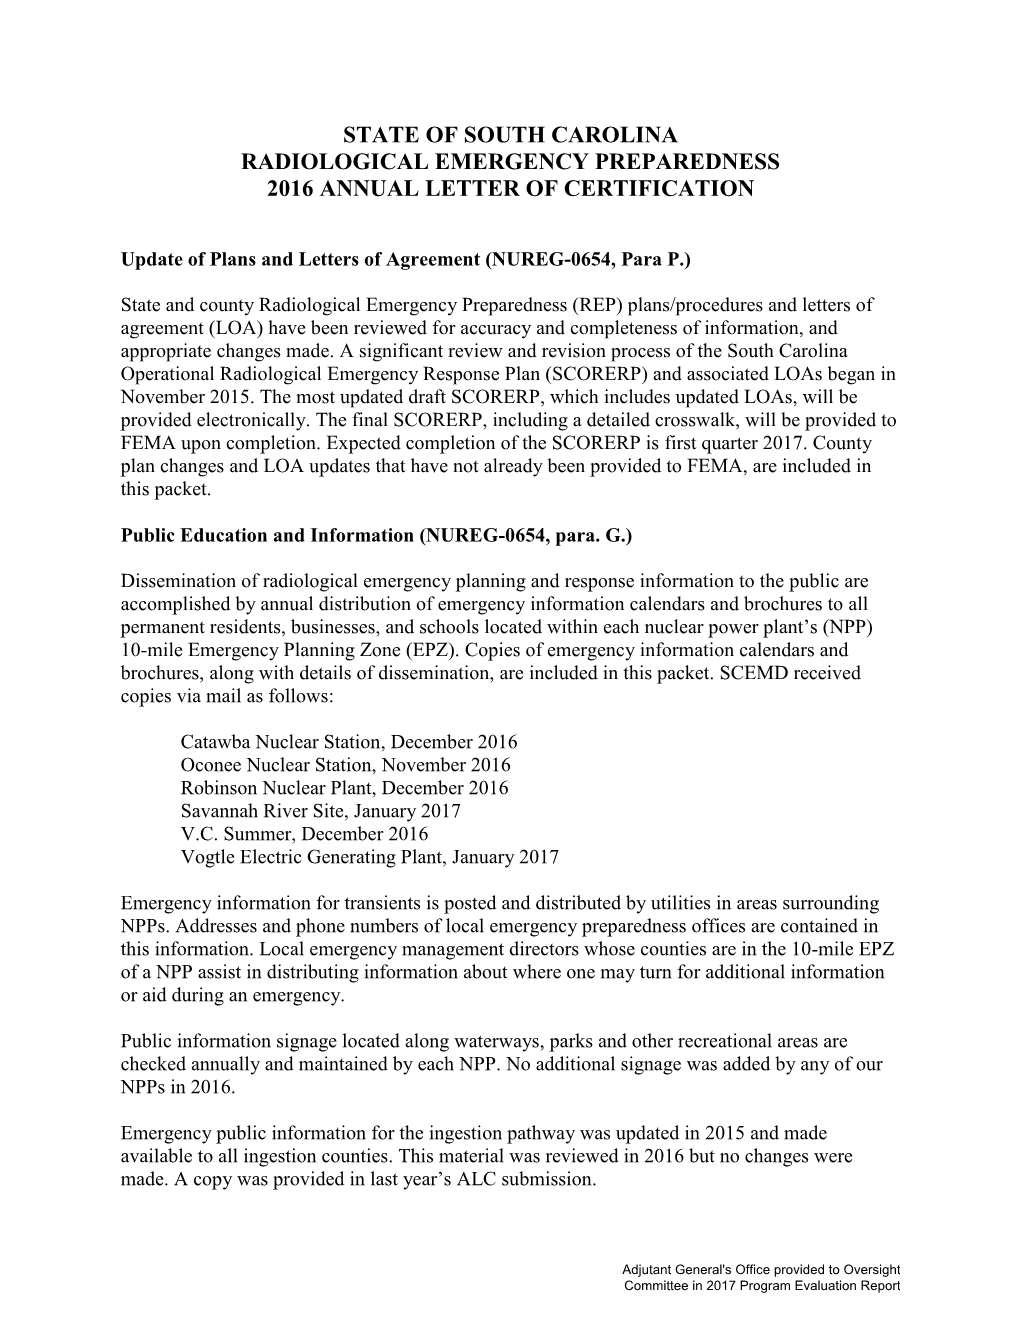 State of South Carolina Radiological Emergency Preparedness 2016 Annual Letter of Certification